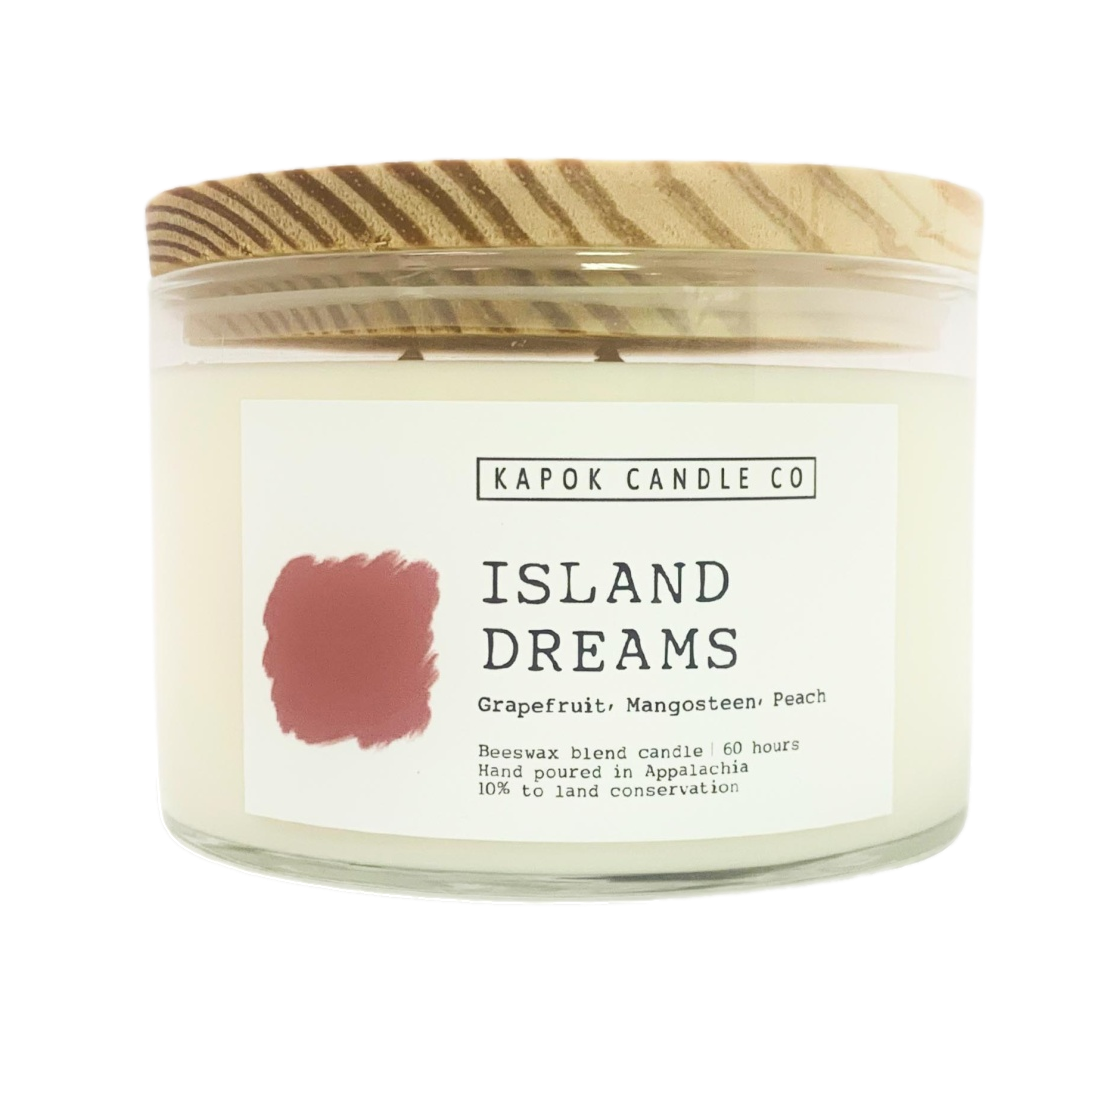 Island Dreams Beeswax Blend Candle, 100% Cotton Wicks, Wooden Lid